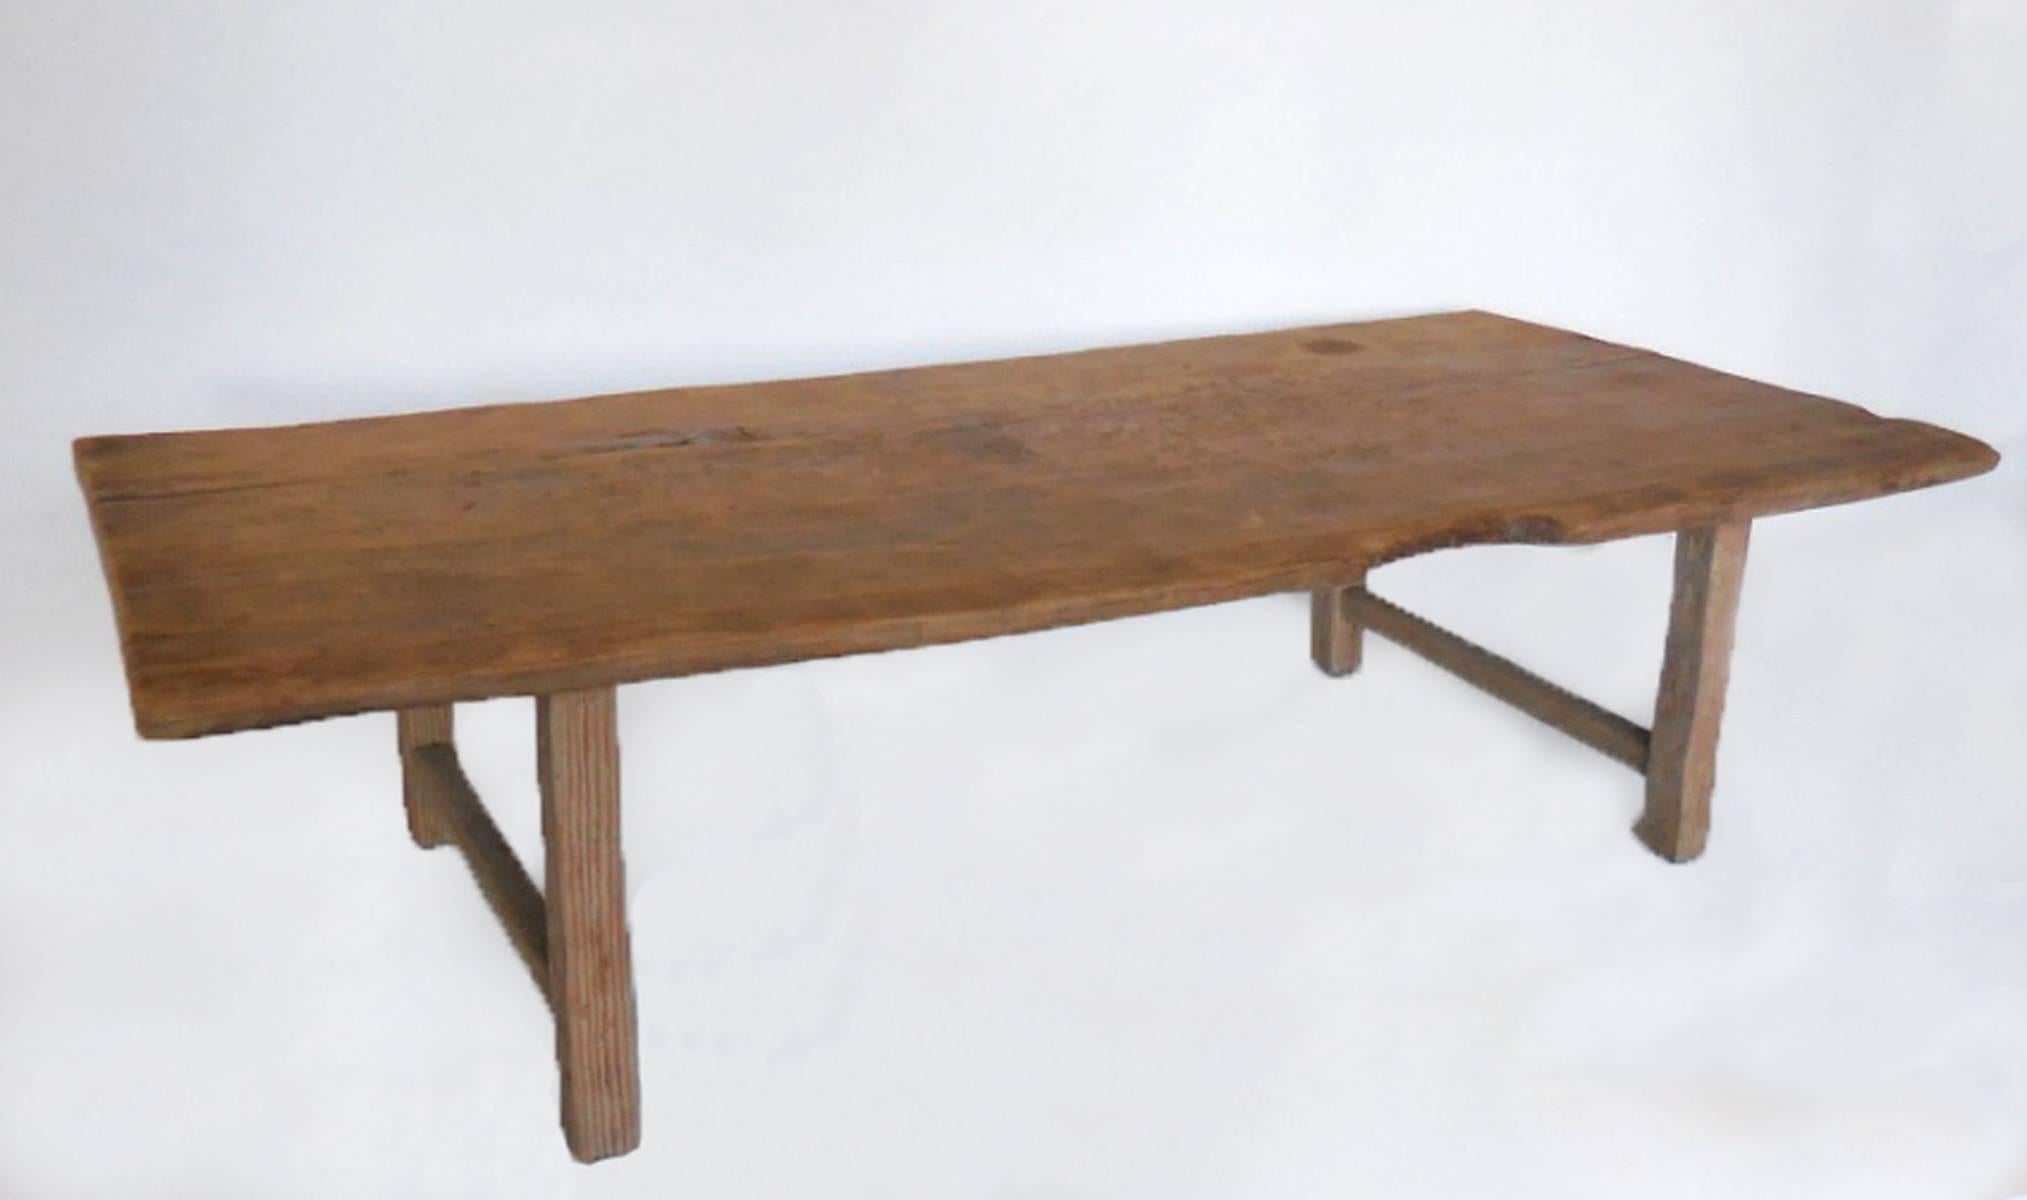 Very old, antique, one wide board atop straight legs. Great natural sun bleached patina. Natural finish. Very rustic. Wear is commensurate with age. See photos. Fully functional and sturdy.